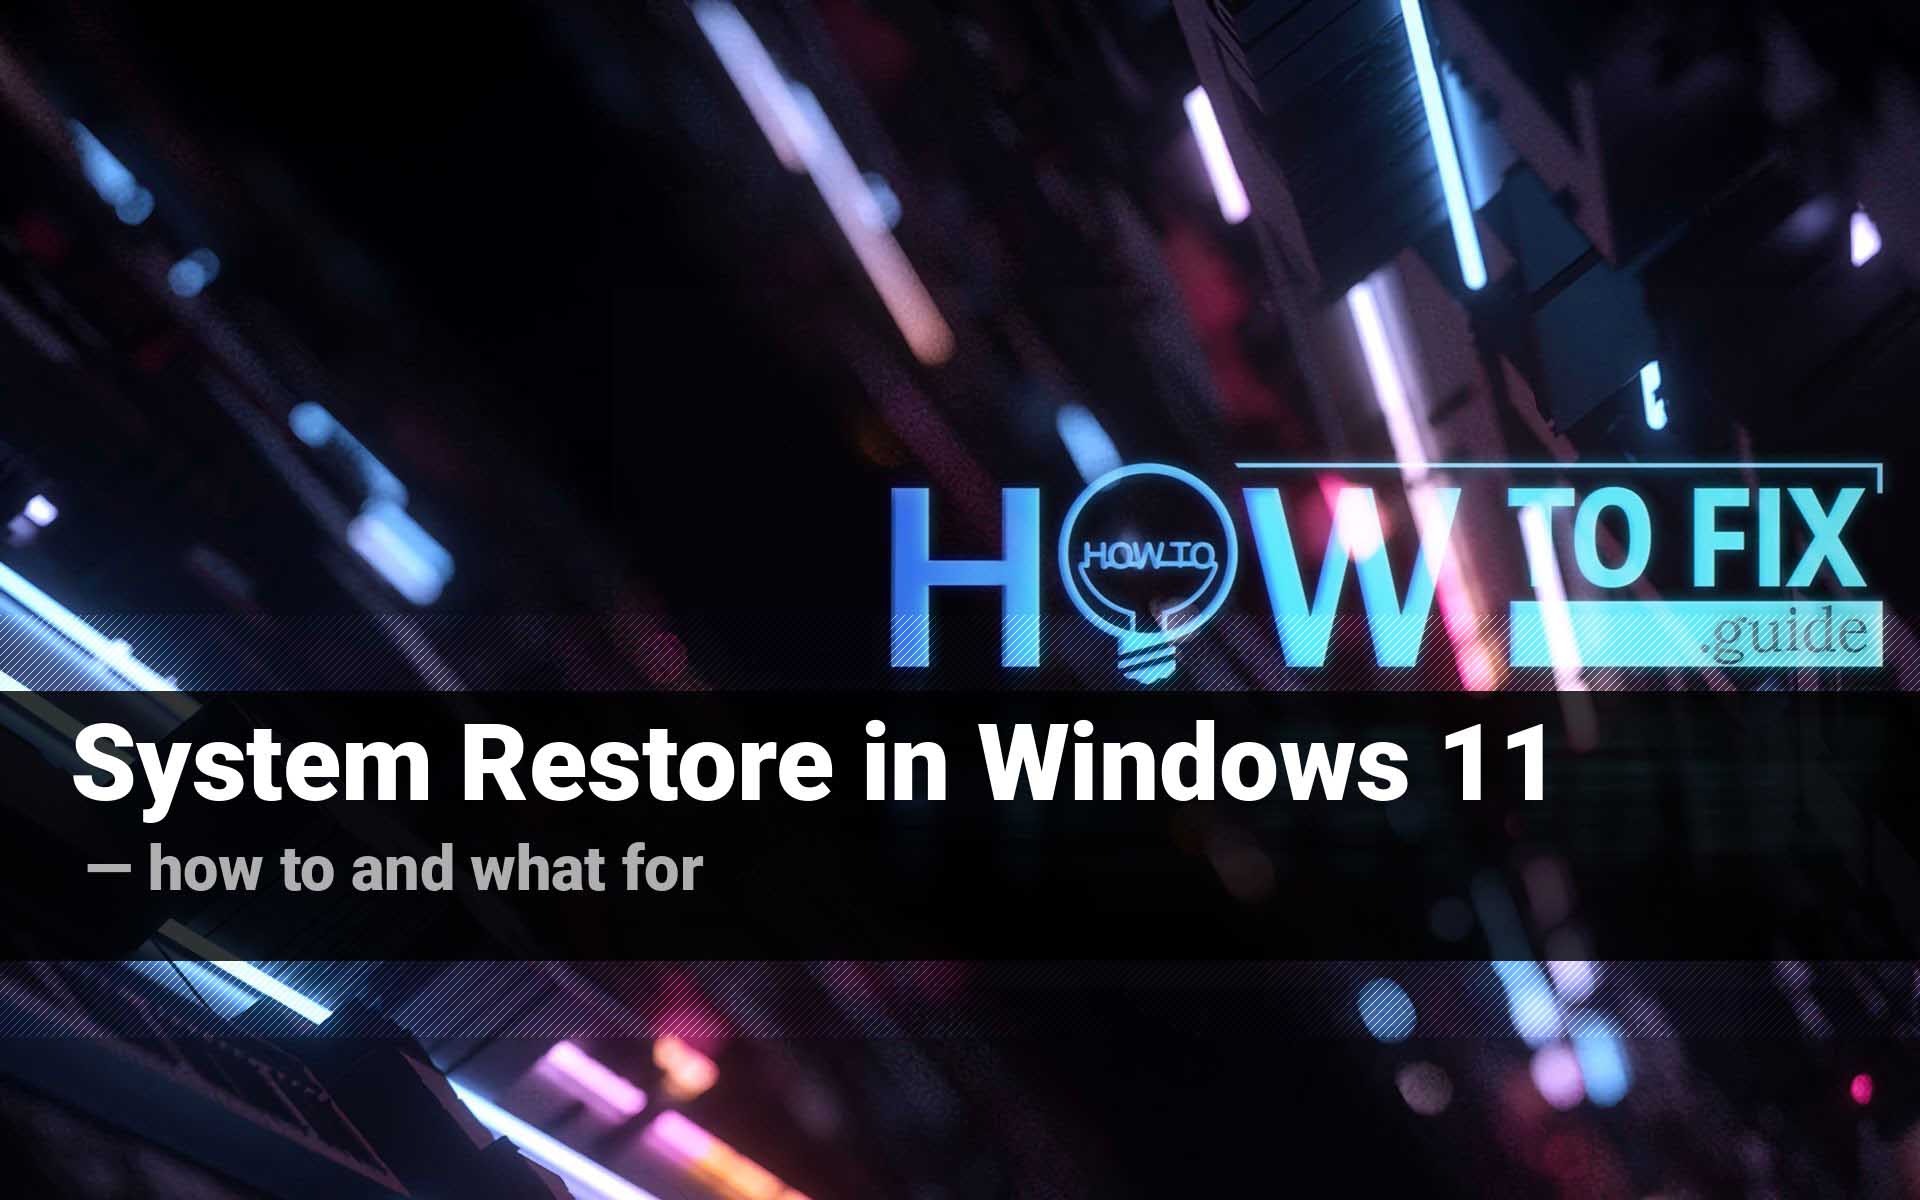 System Restore in Windows 11: how to and what for